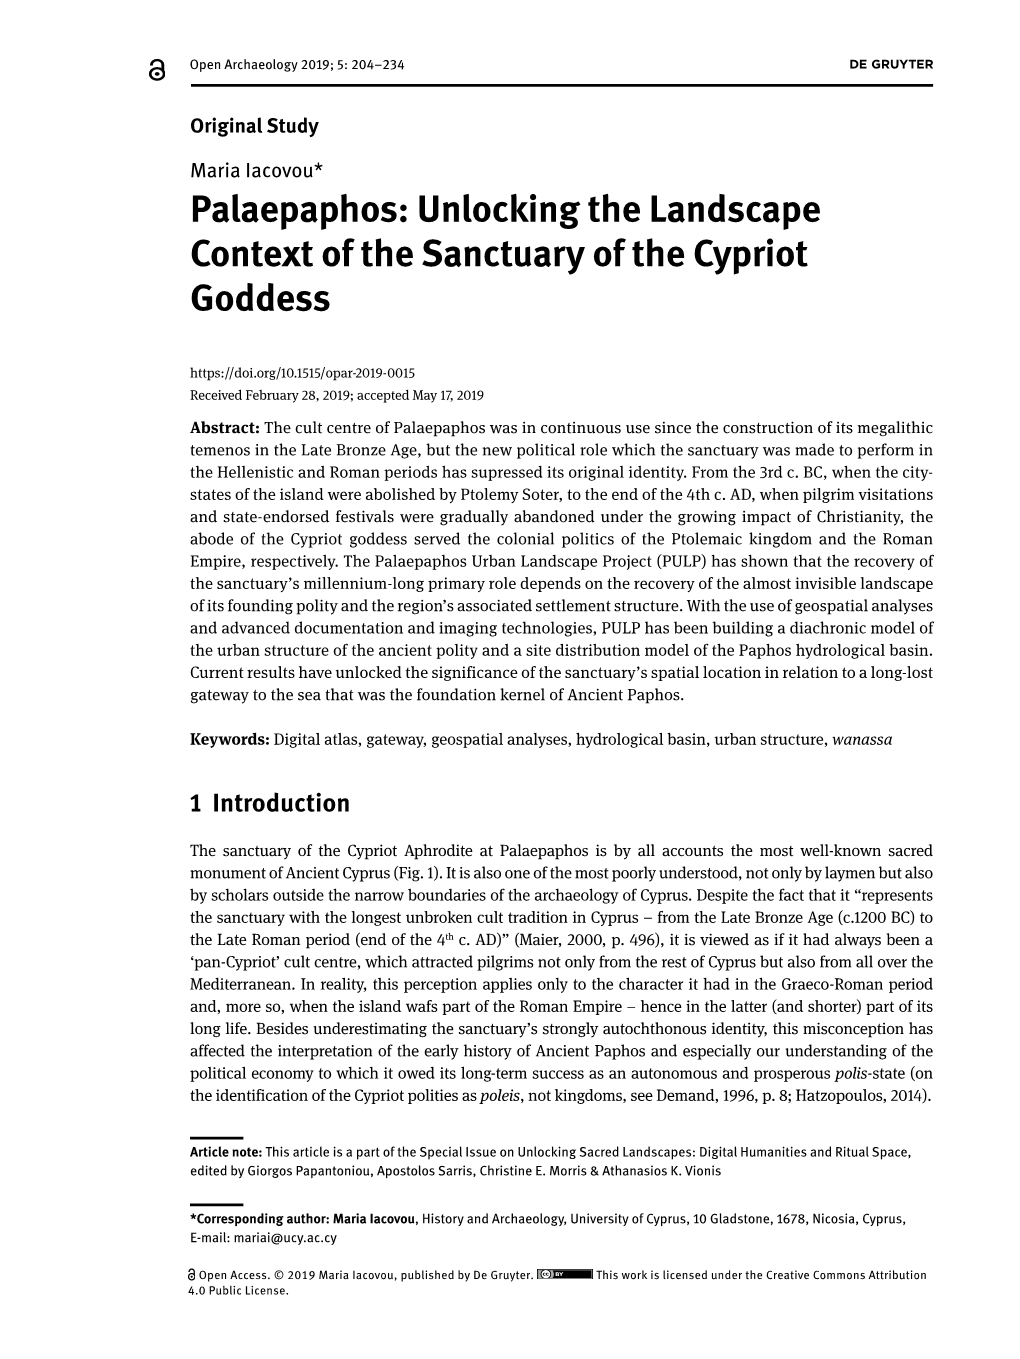 Palaepaphos: Unlocking the Landscape Context of the Sanctuary of the Cypriot Goddess